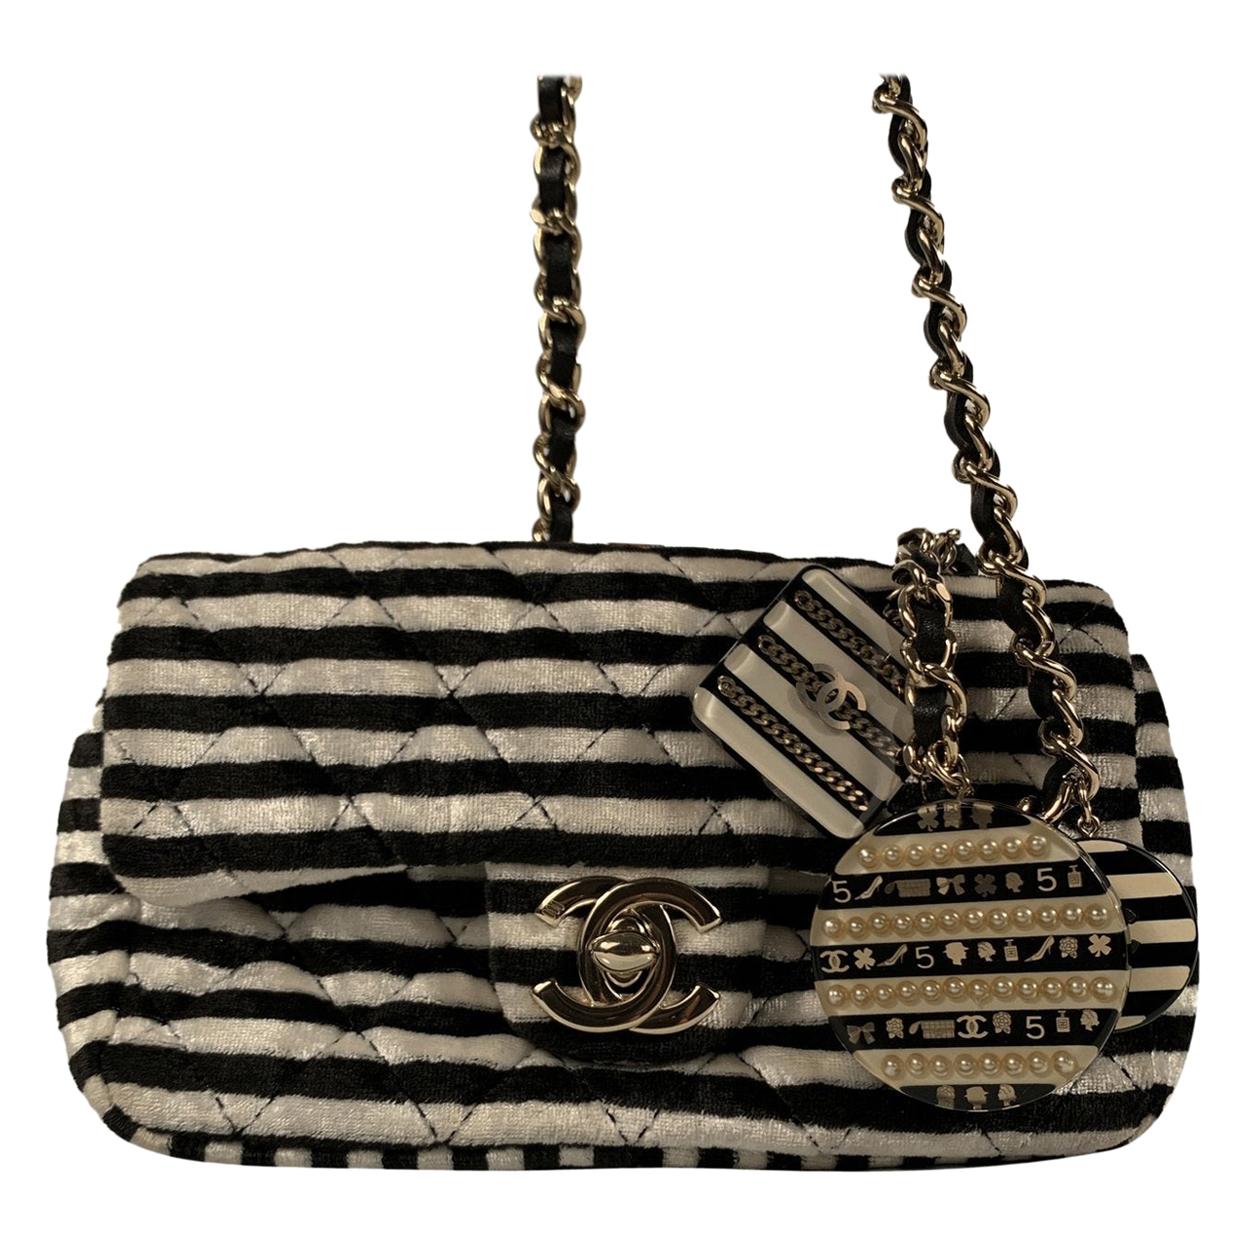 Chanel Striped Black and White Velvet Mini Crossbody Bag with Charms